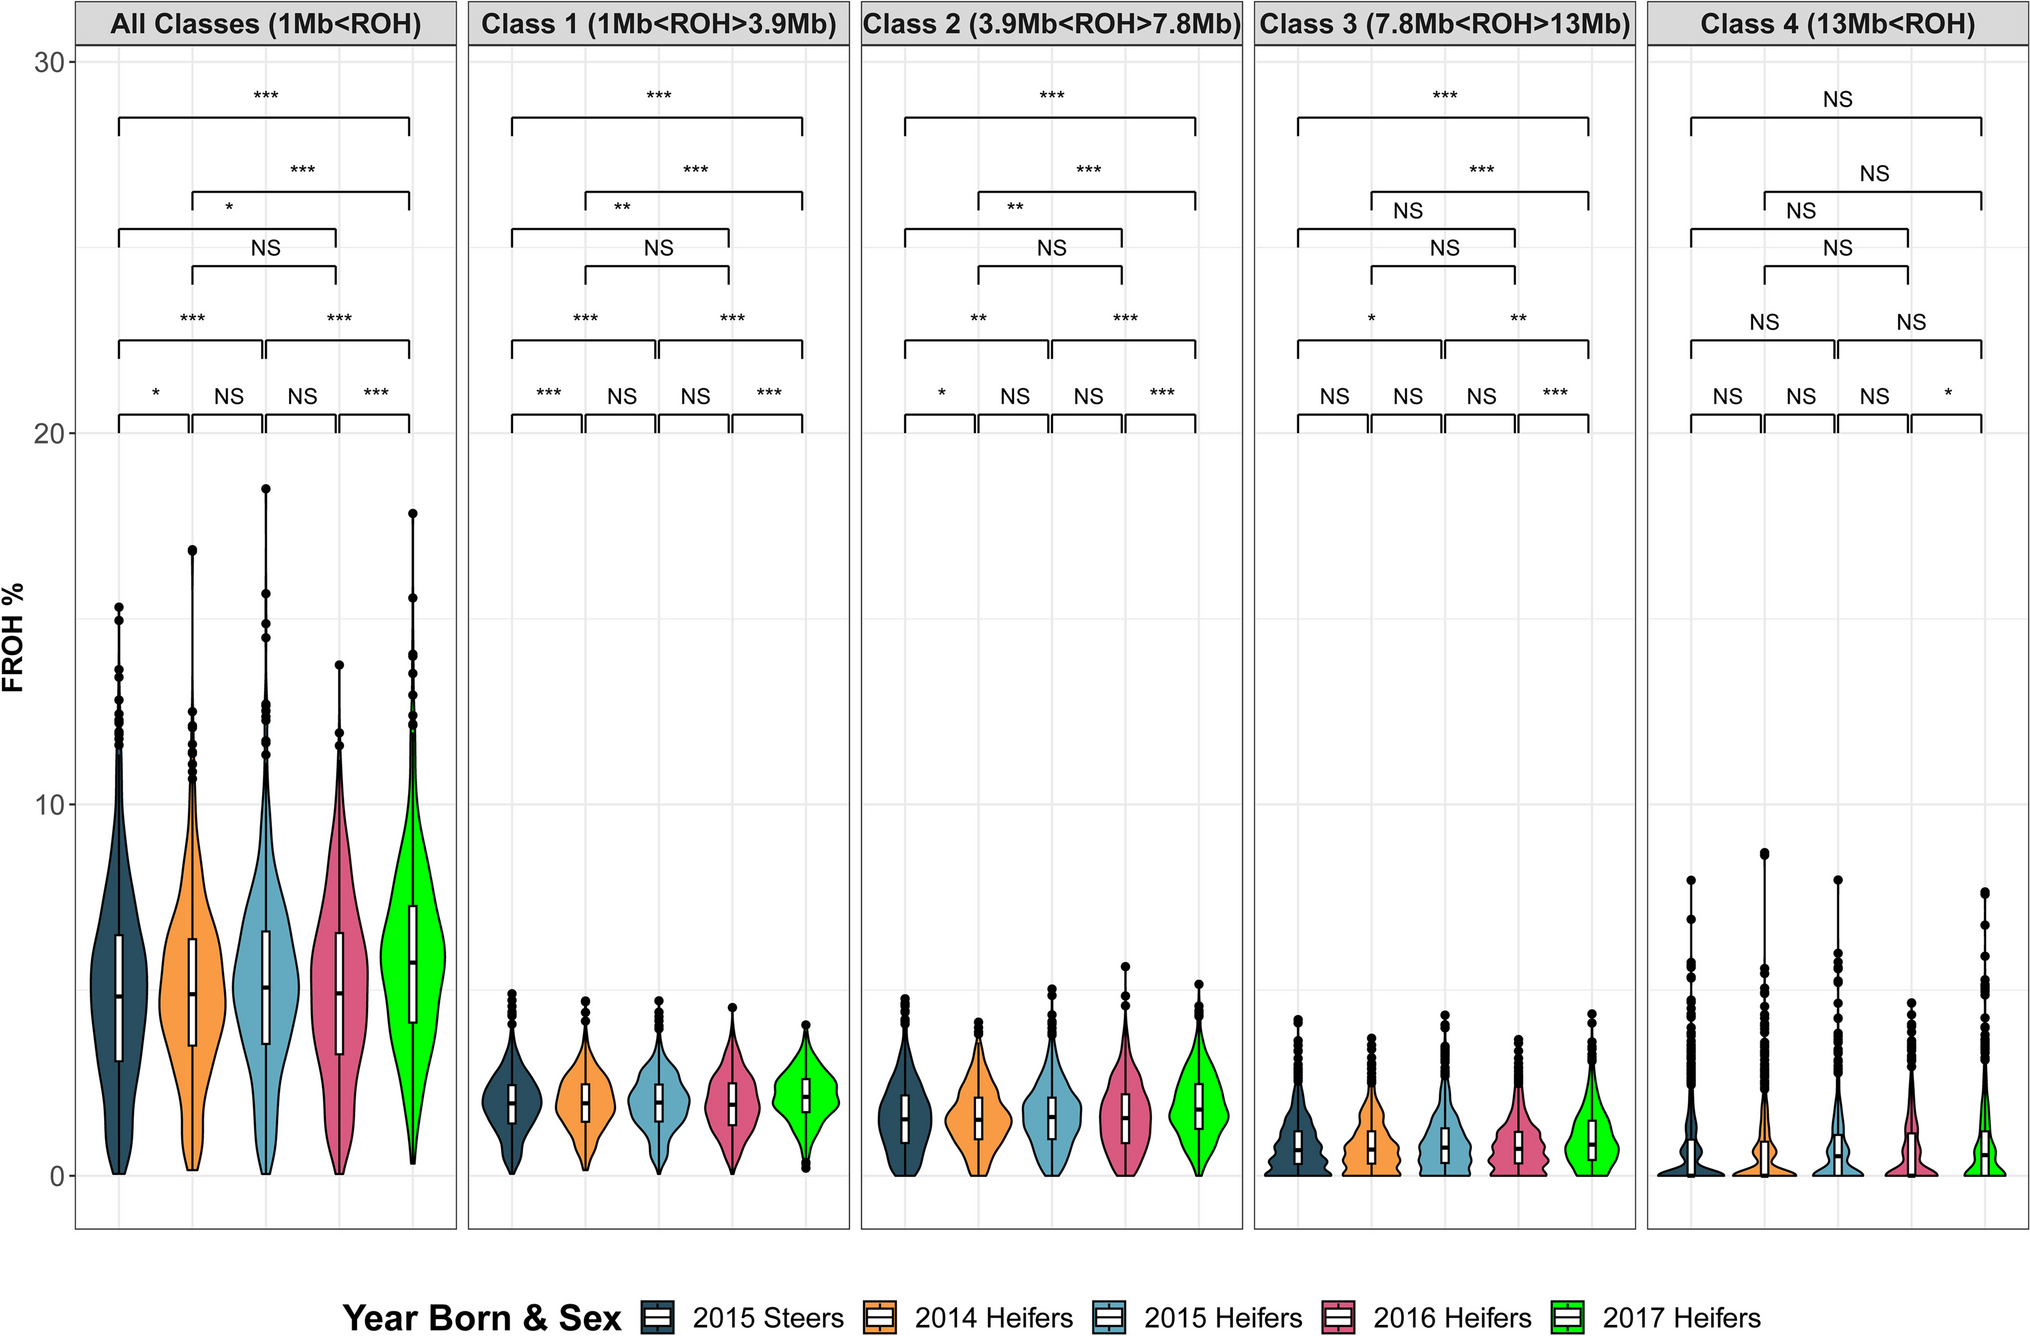 Exploring genomic inbreeding and selection signatures in a commercial Brangus herd through functional annotation